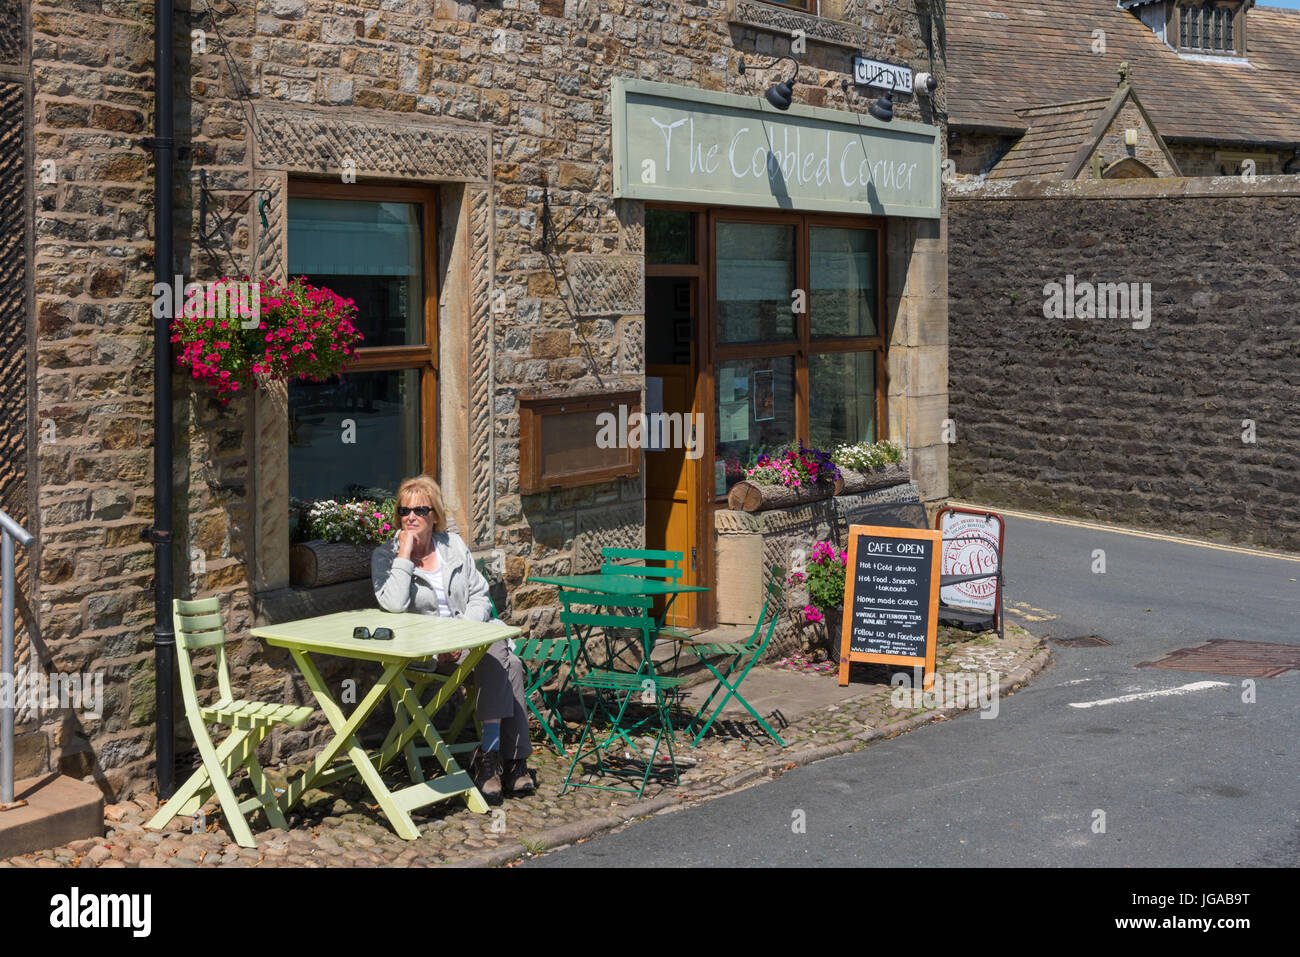 The Cobbled Corner Cafe on Club Lane in Chipping Lancashire Stock Photo